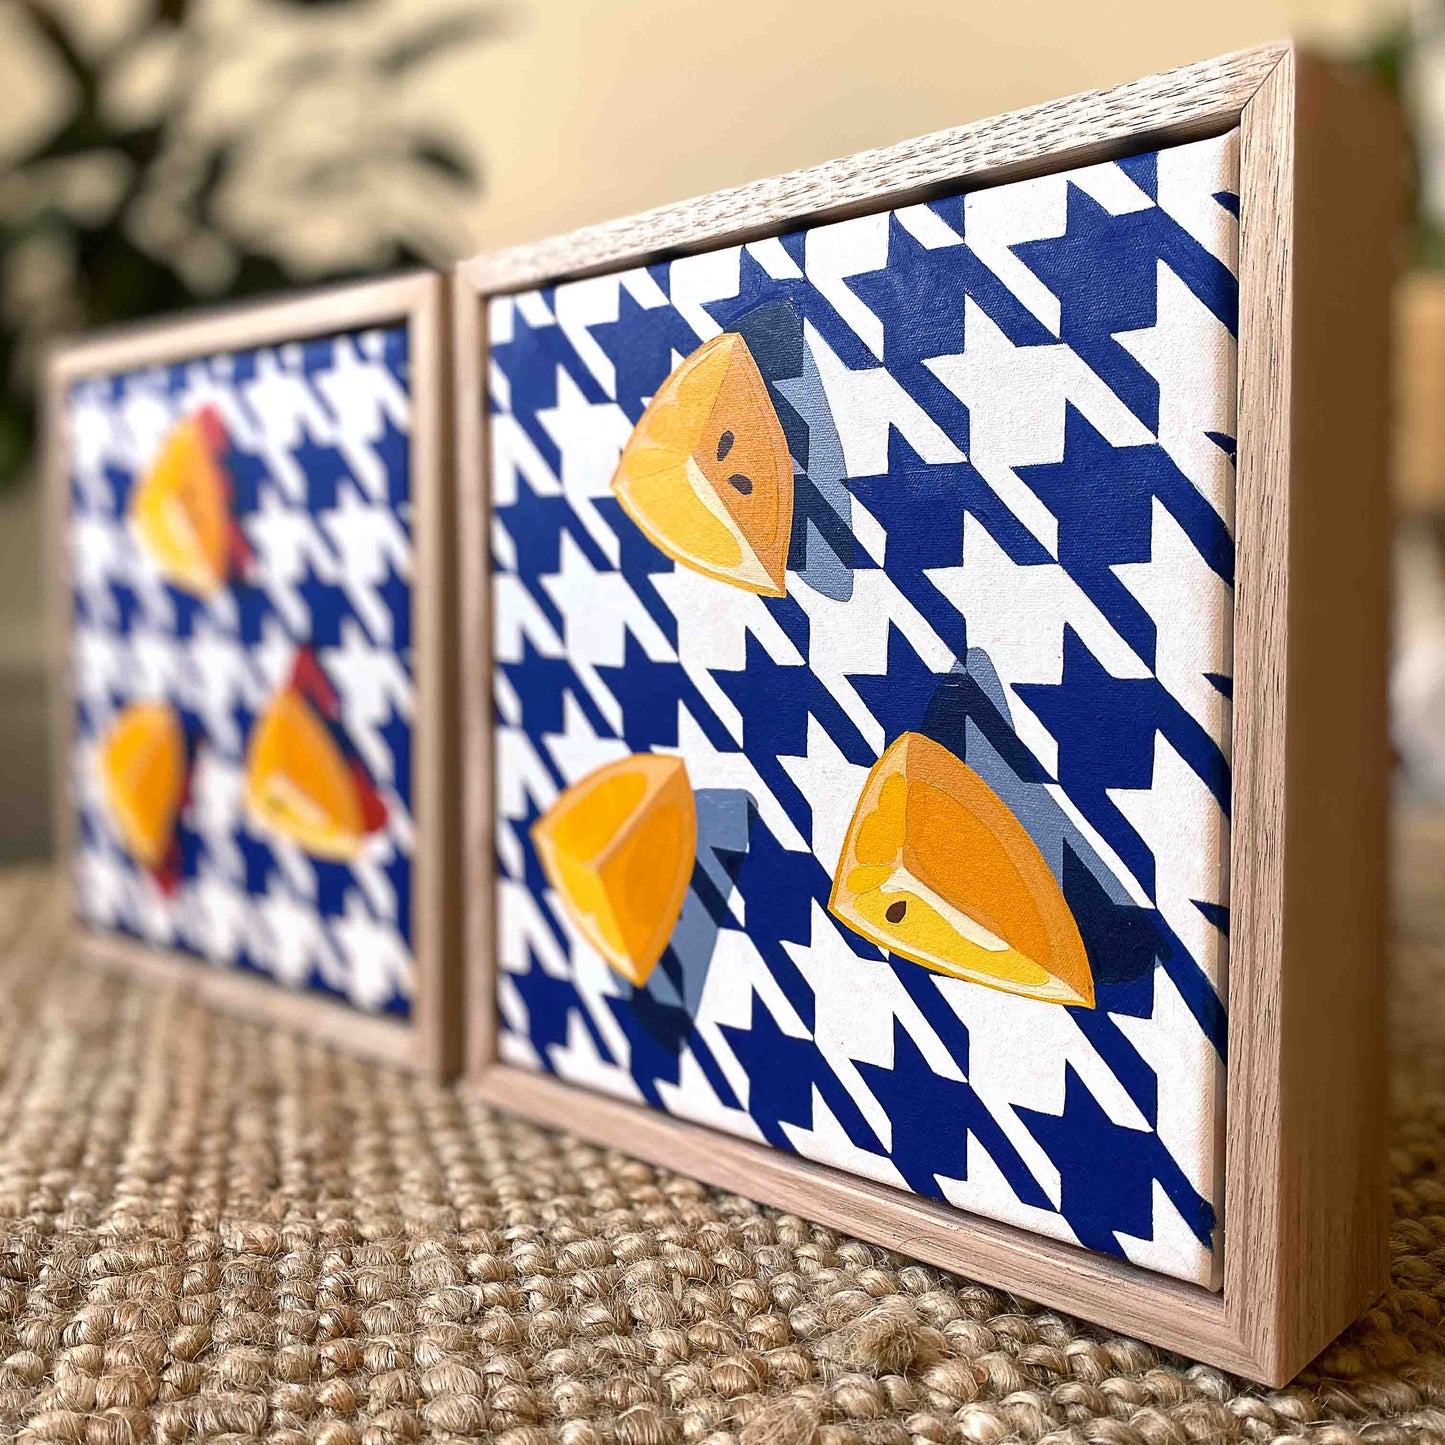 lifestyle photo of original oil painting of three wedges of yellow lemons on a navy blue and white houndstooth background with strong blue-grey shadows, framed in raw timber American Ash shadow box